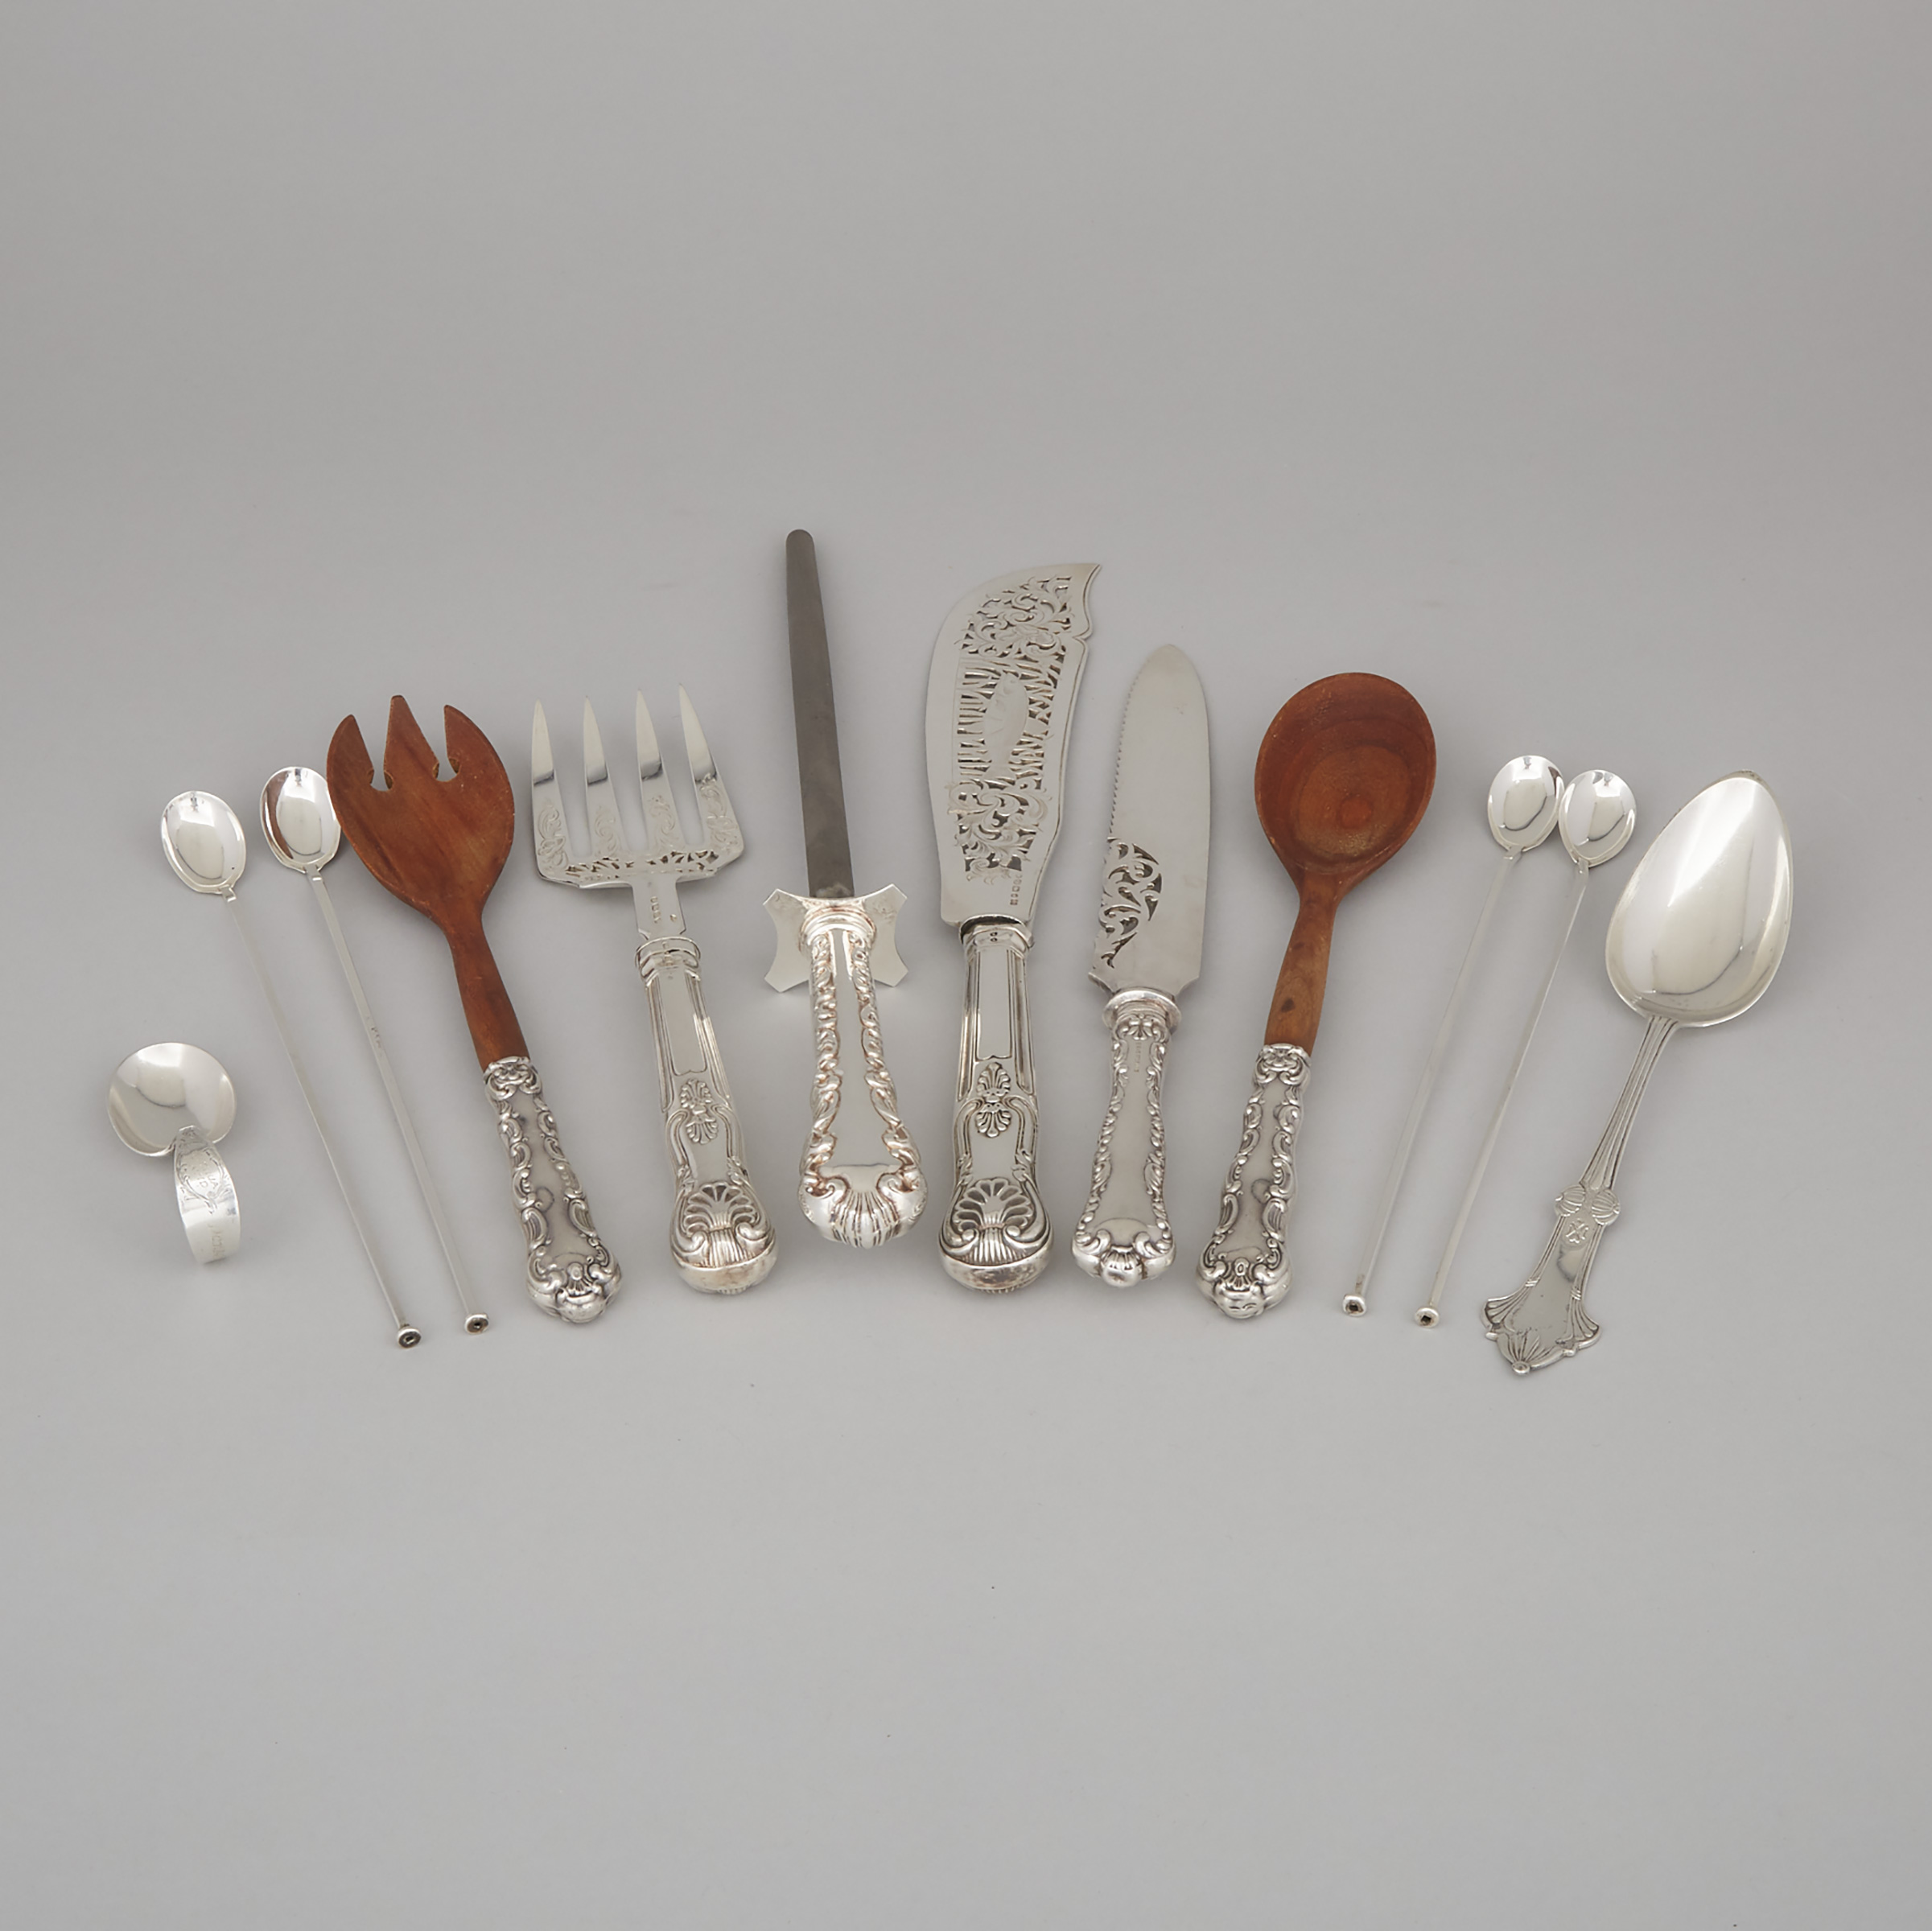 Pair of Victorian Silver Fish Servers, George Adams, London, 1854, and Ten Pieces of North American Flatware, 20th century